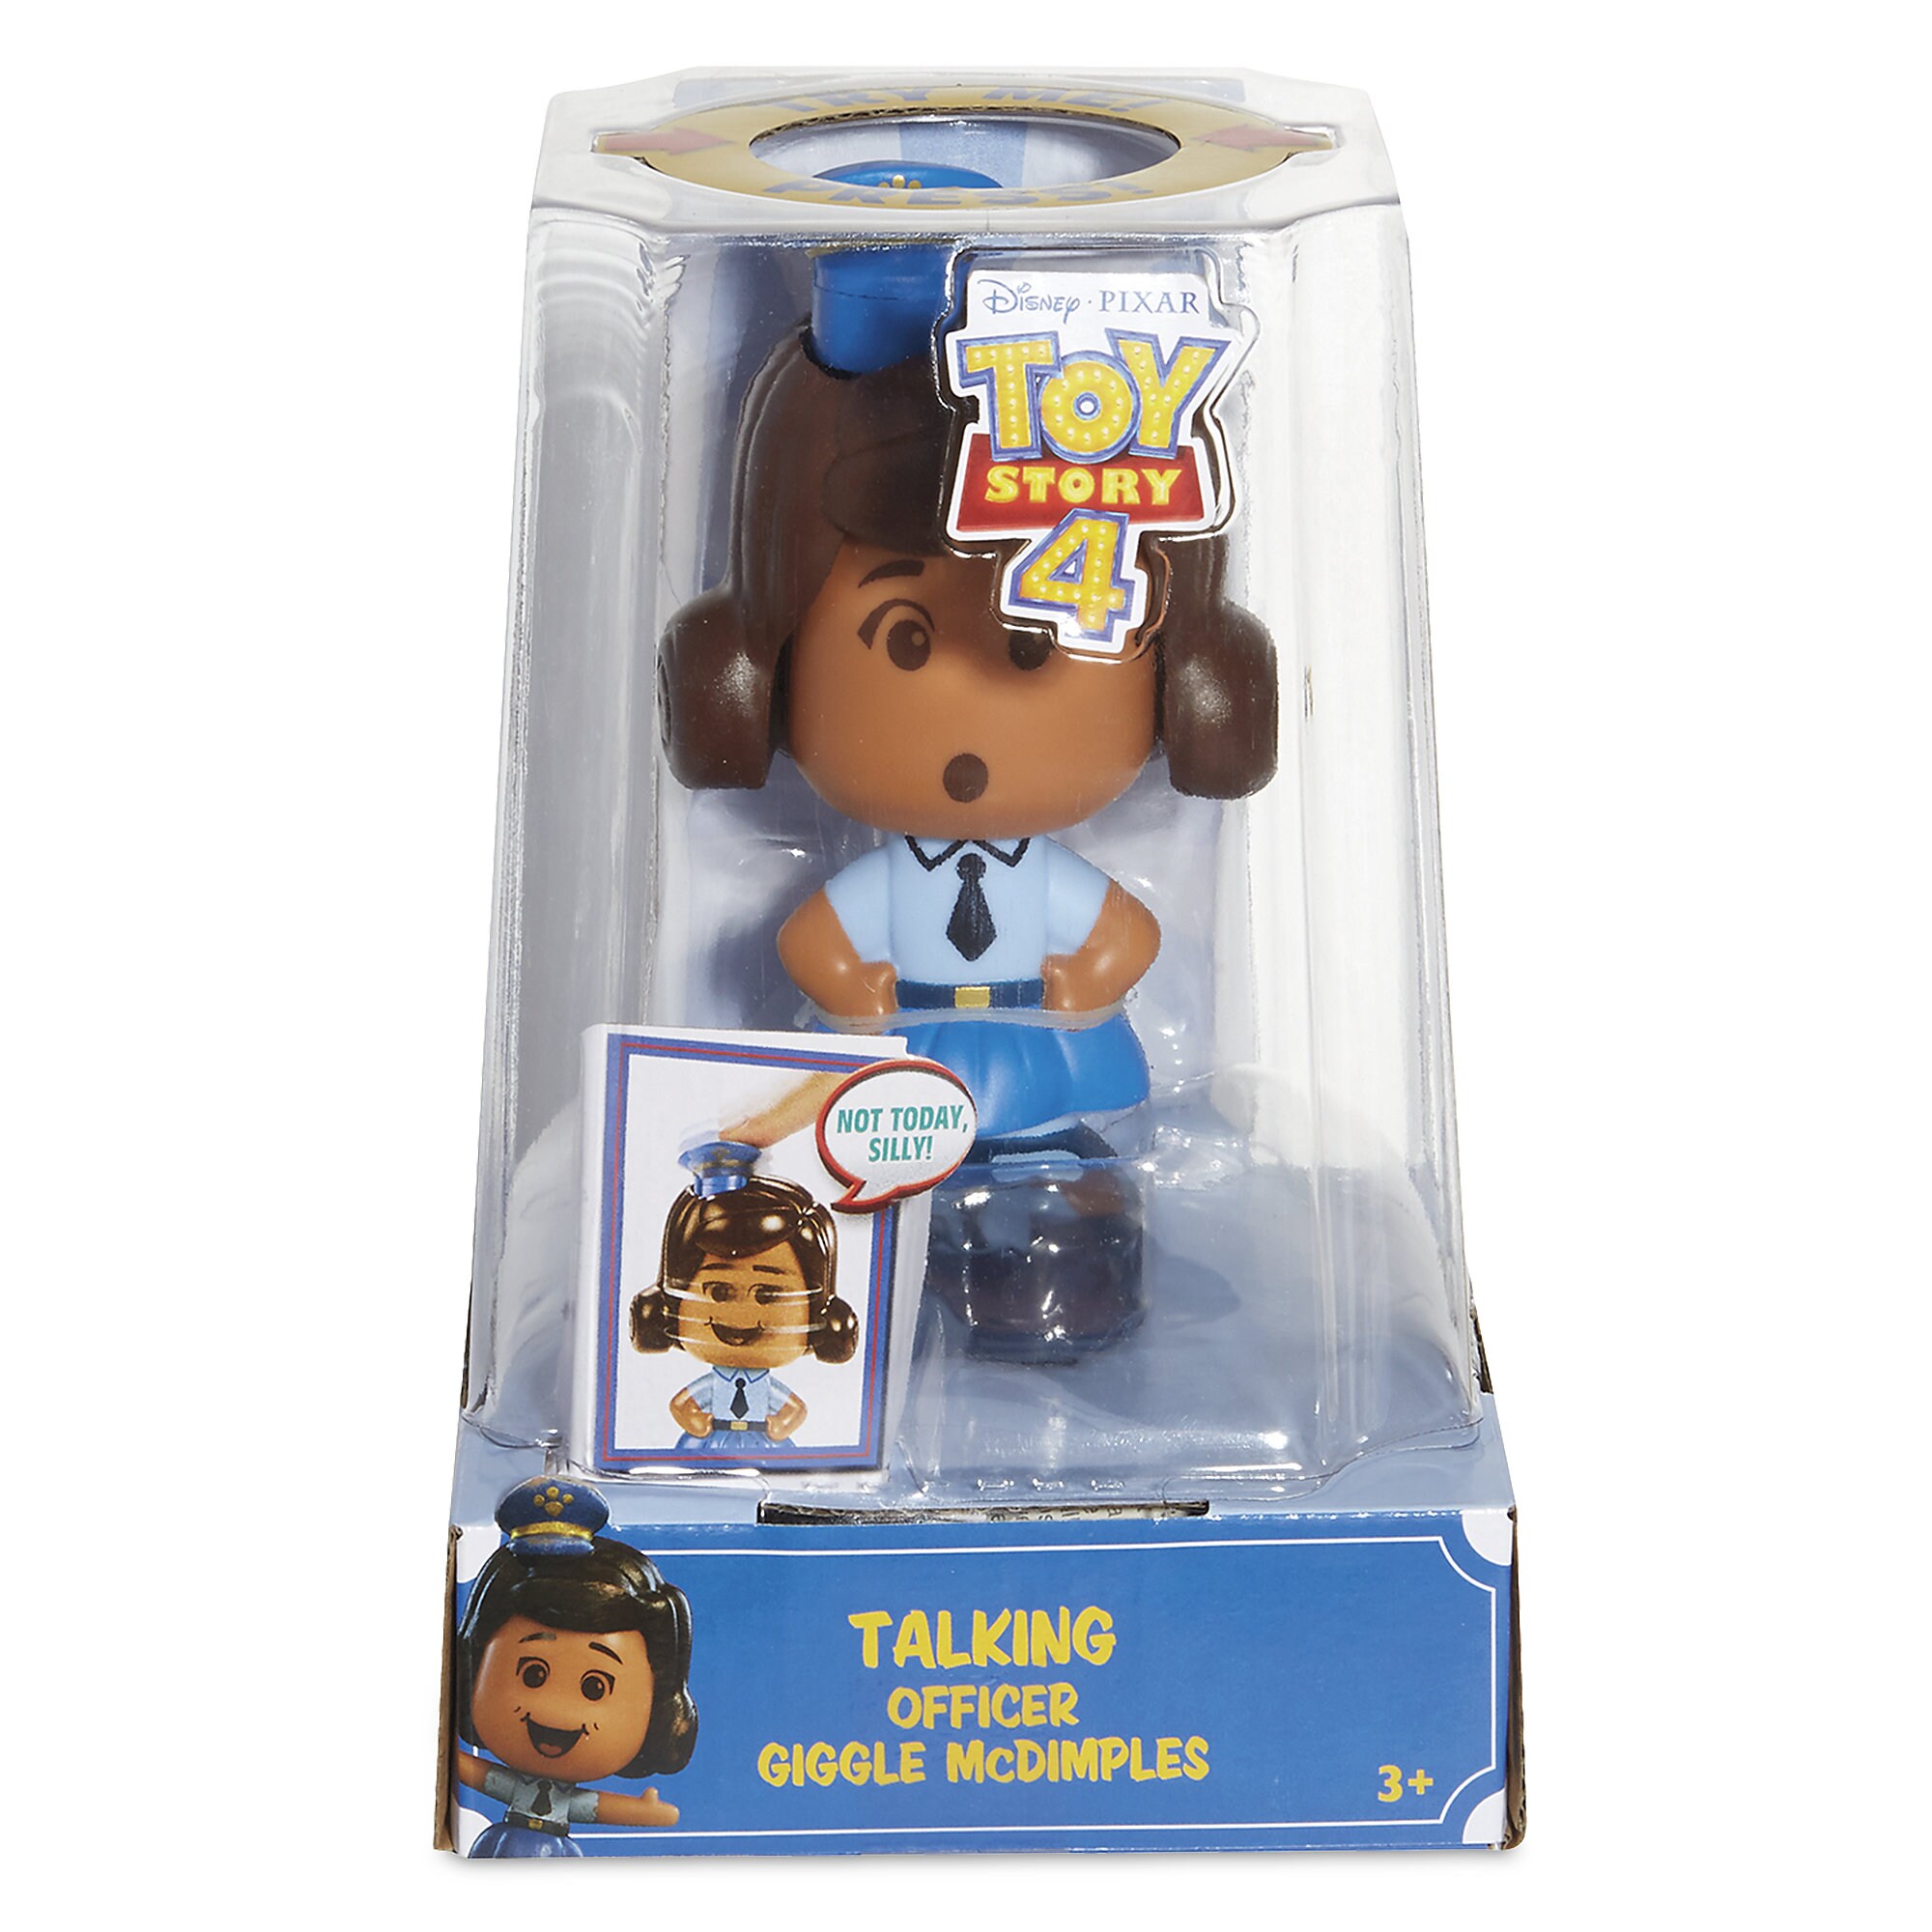 Officer Giggle McDimples Talking Figure – Toy Story 4 available online for purchase